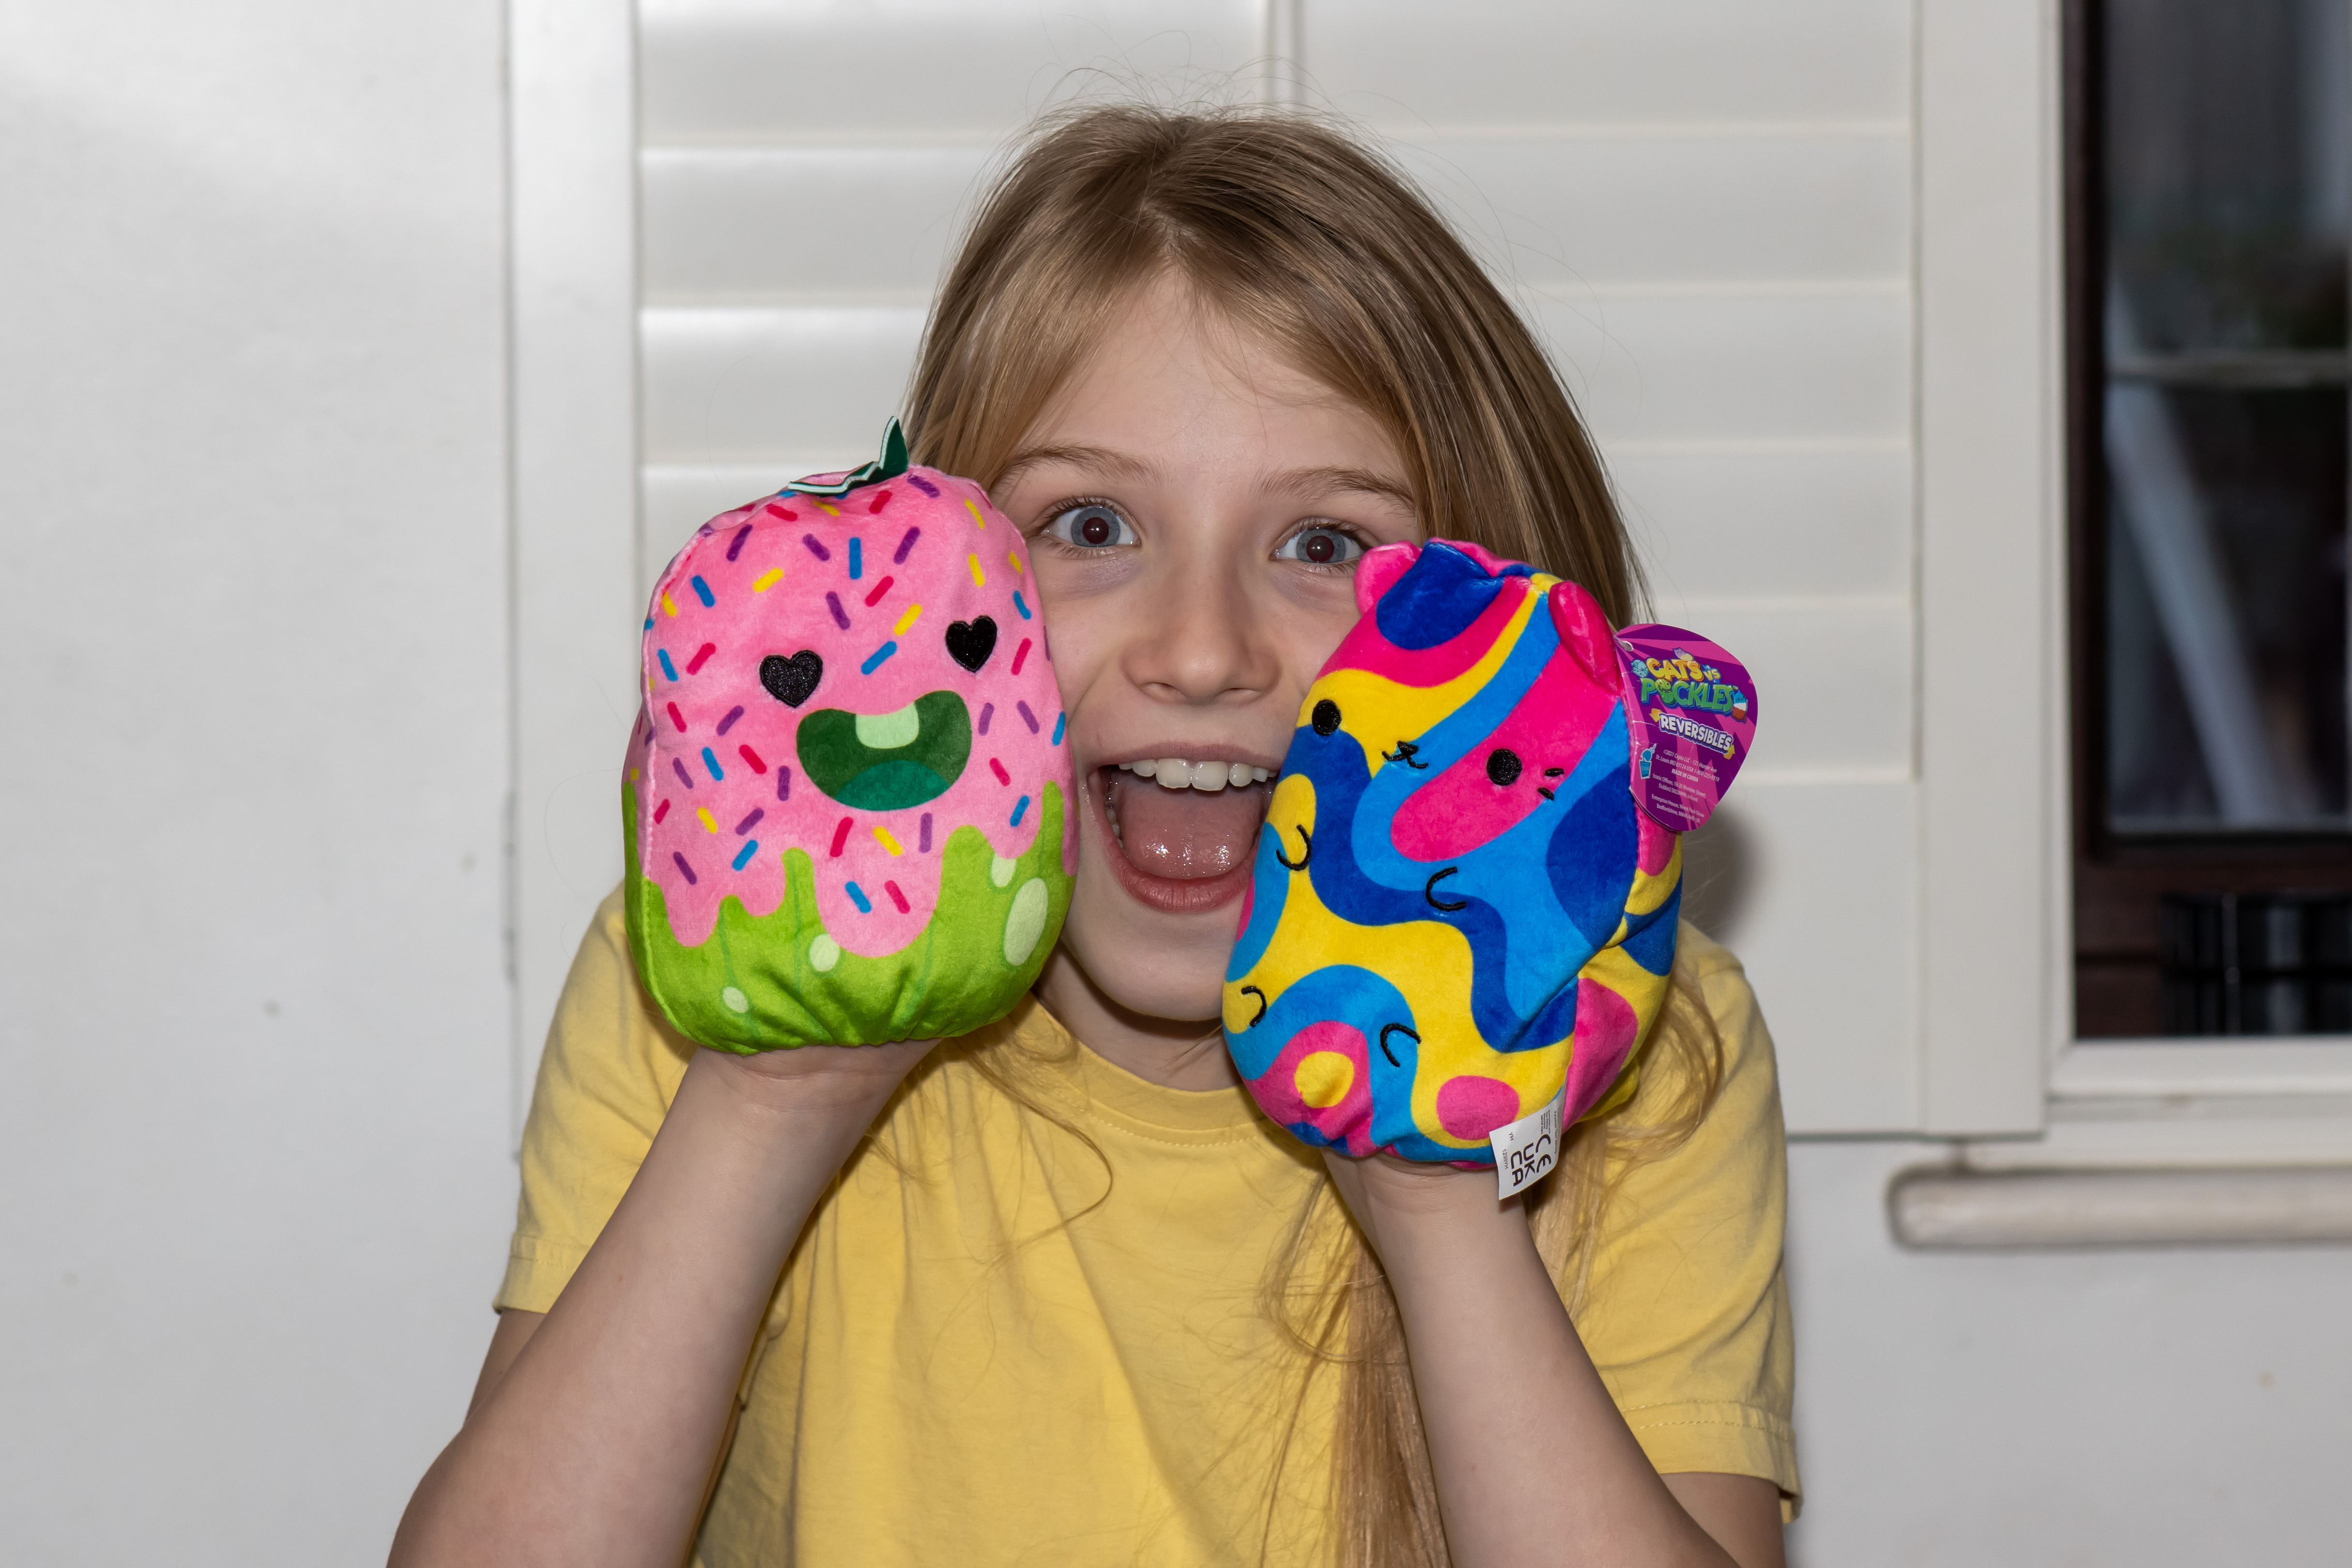 A tween girl in a yellow top playing with cats versus pickles reversible plush toys received for review